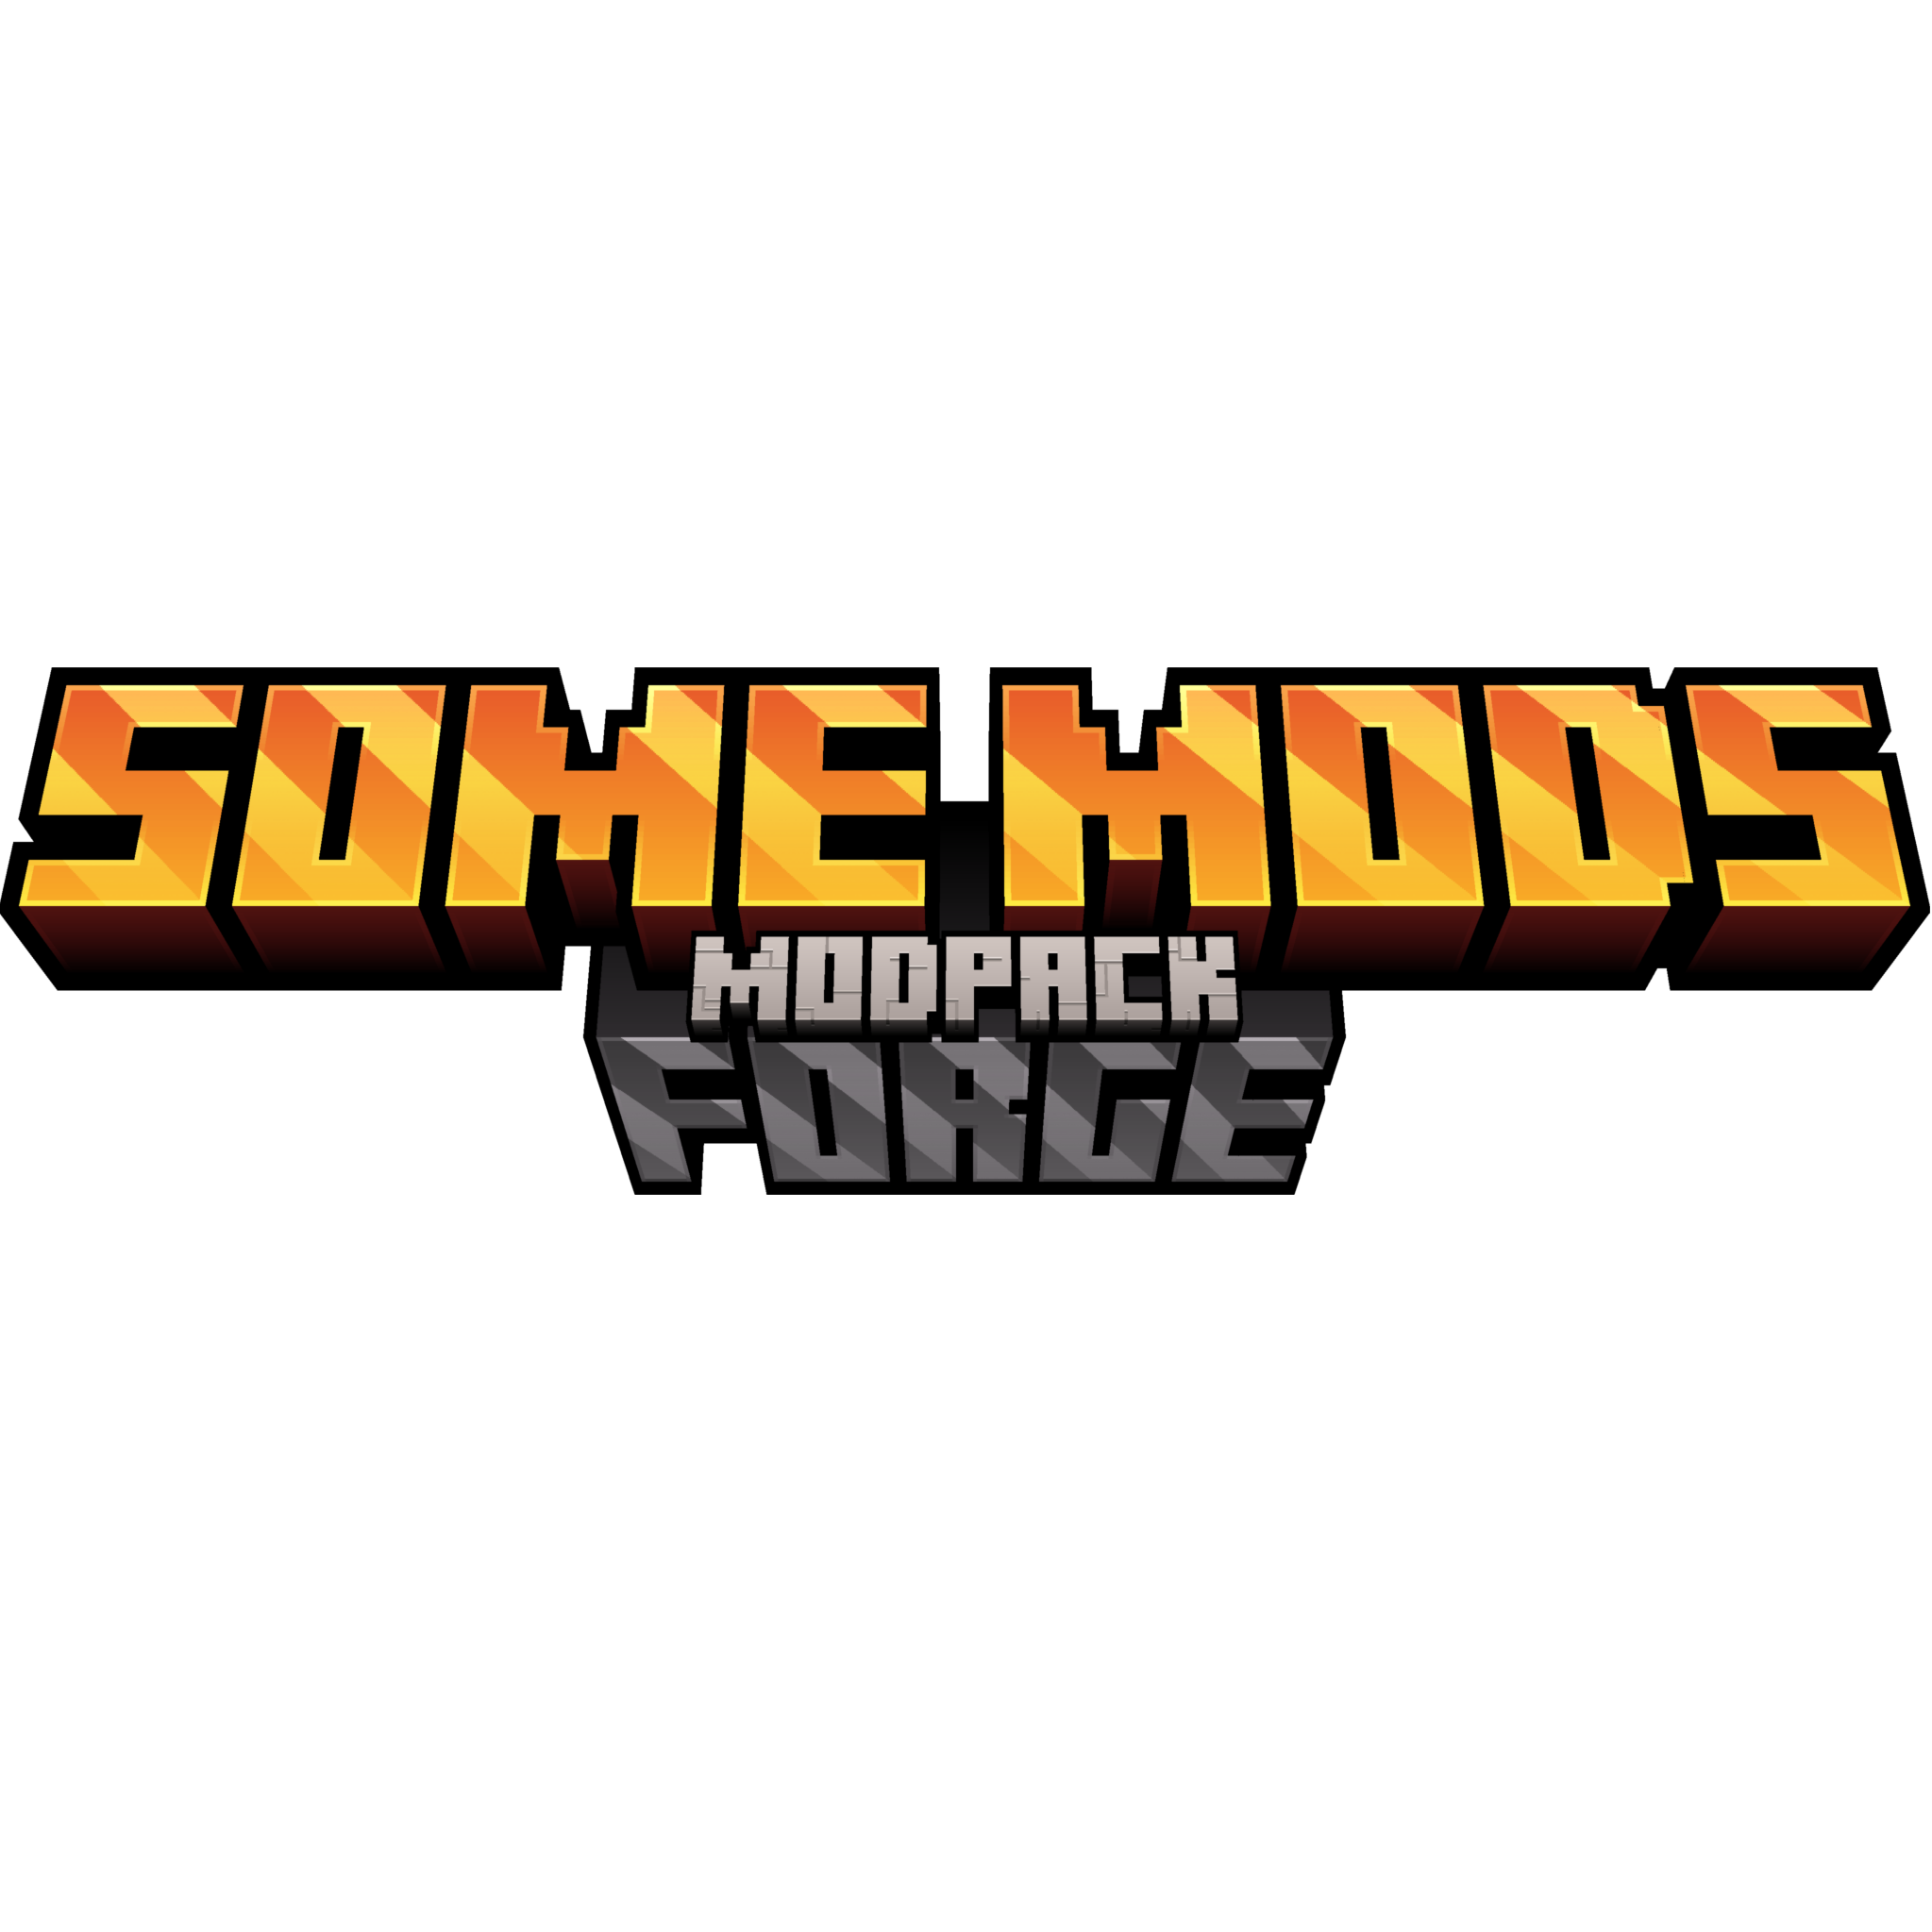 mojang minecraft forge download